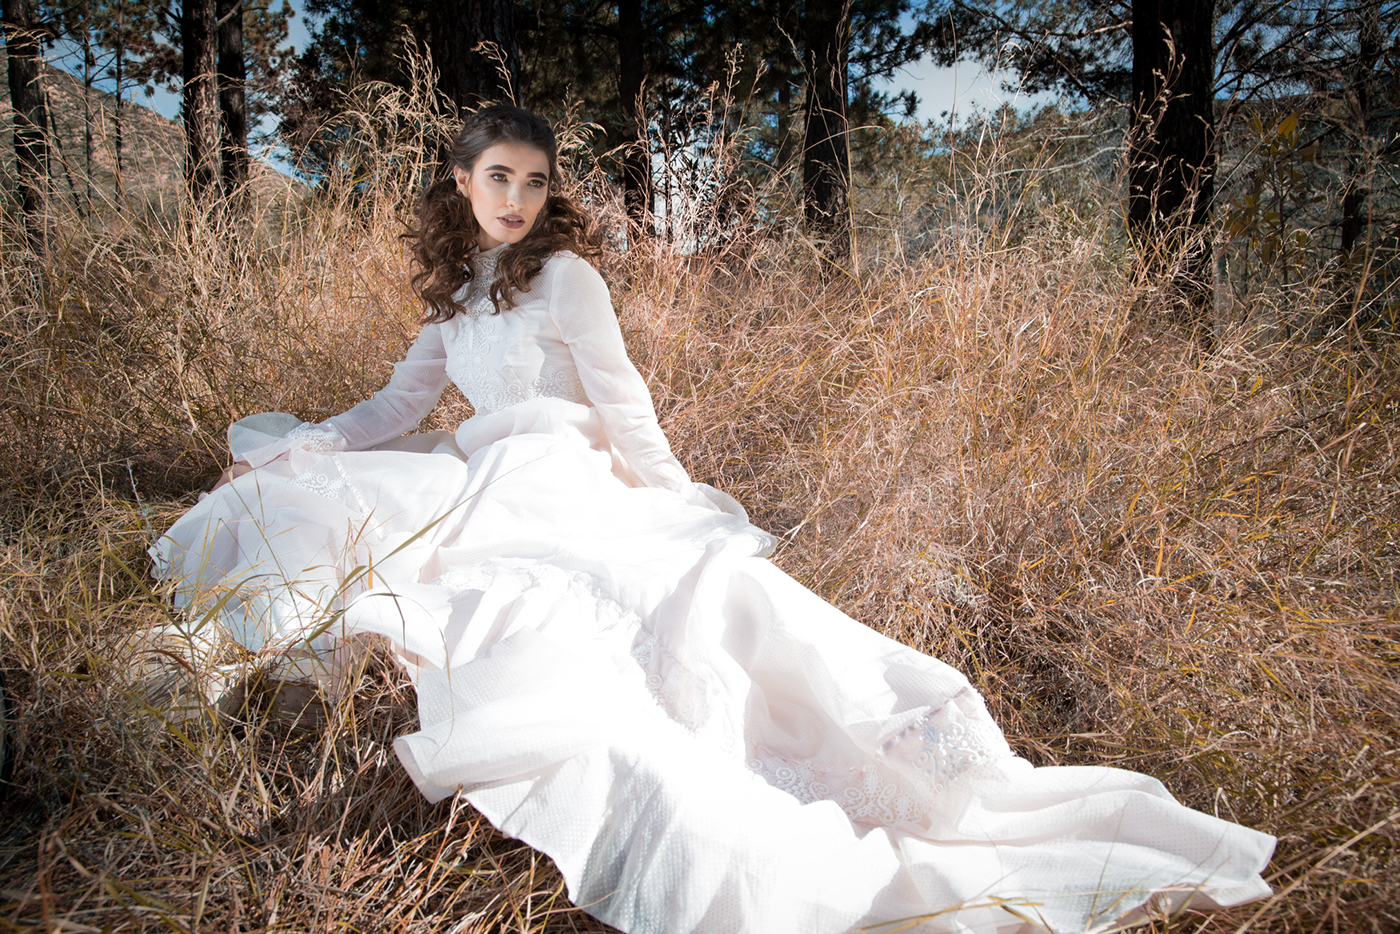 Los Angeles Angeles Crest fashion editorial model trees woods